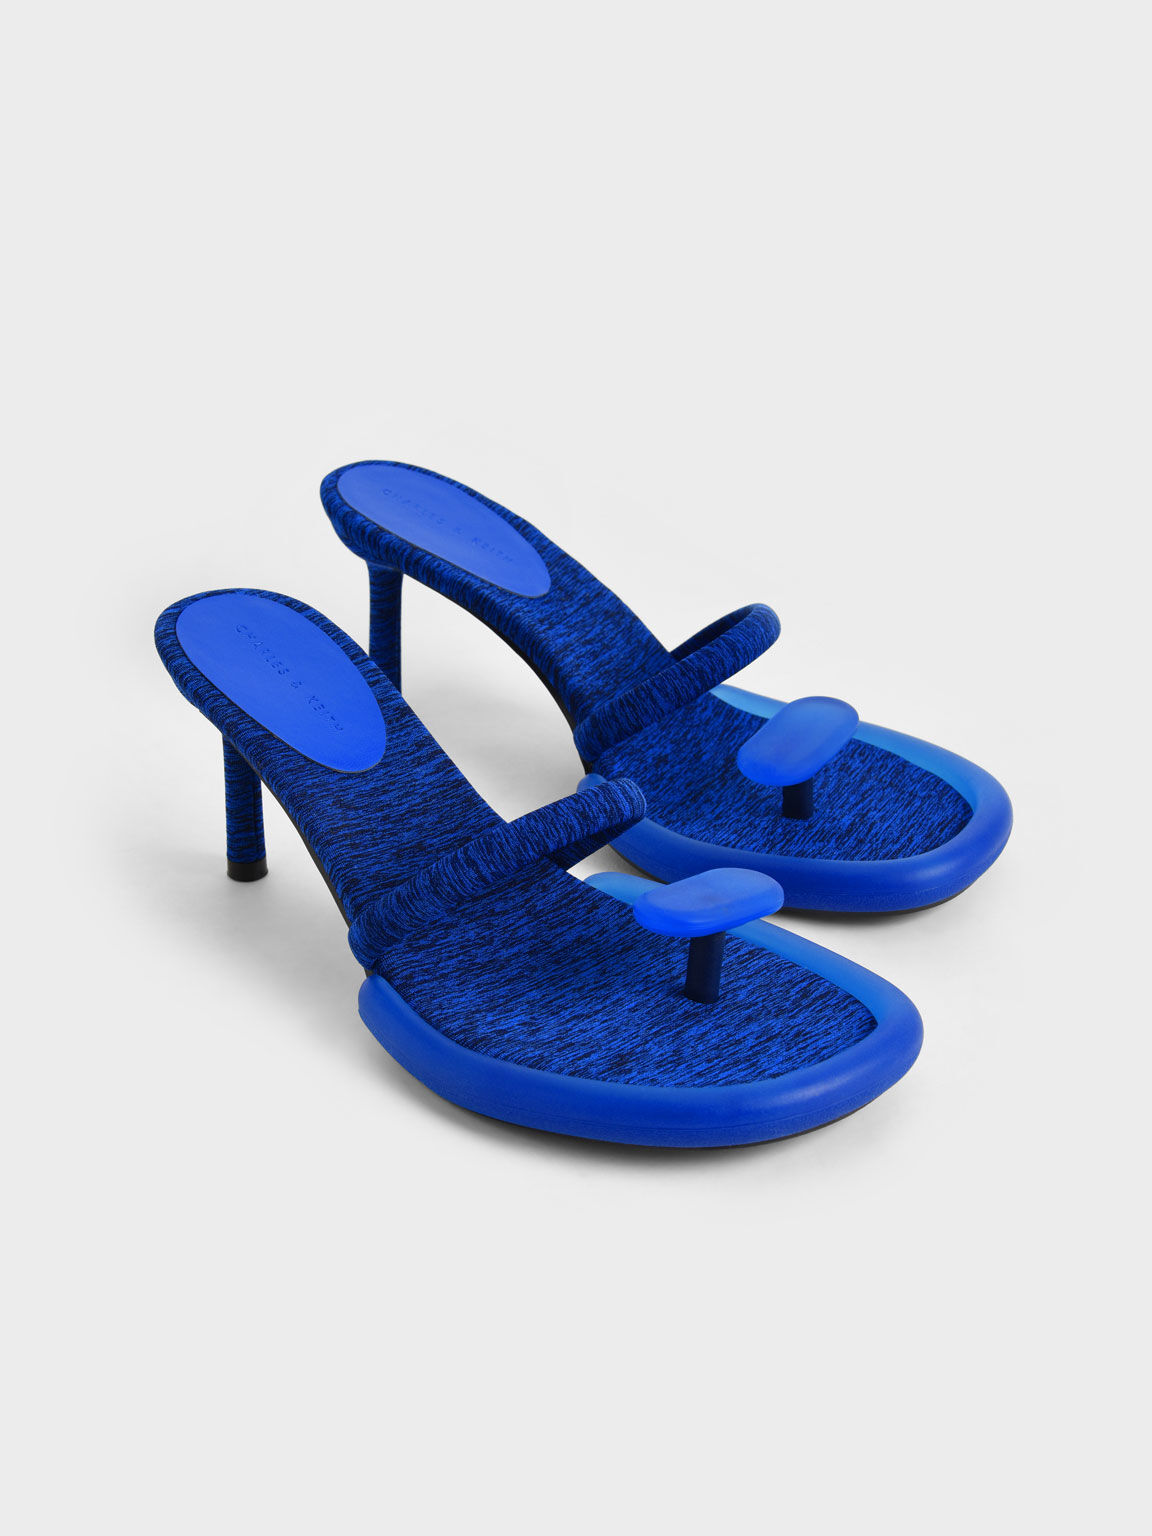 Giày cao gót sandals nữ Electra Recycled Polyester, Xanh blue, hi-res